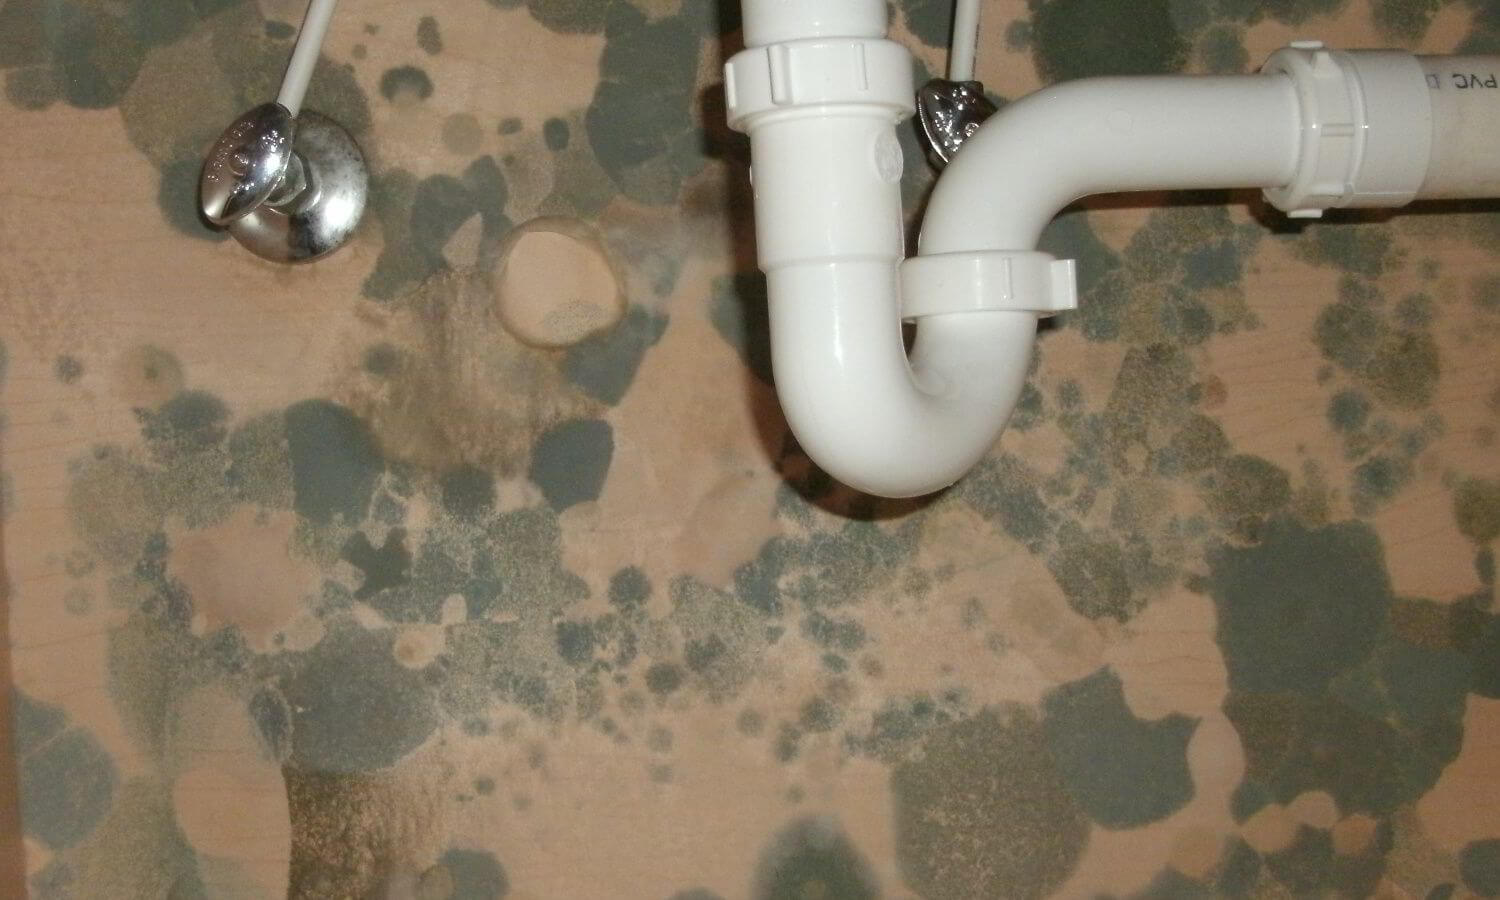 types of mold in homes